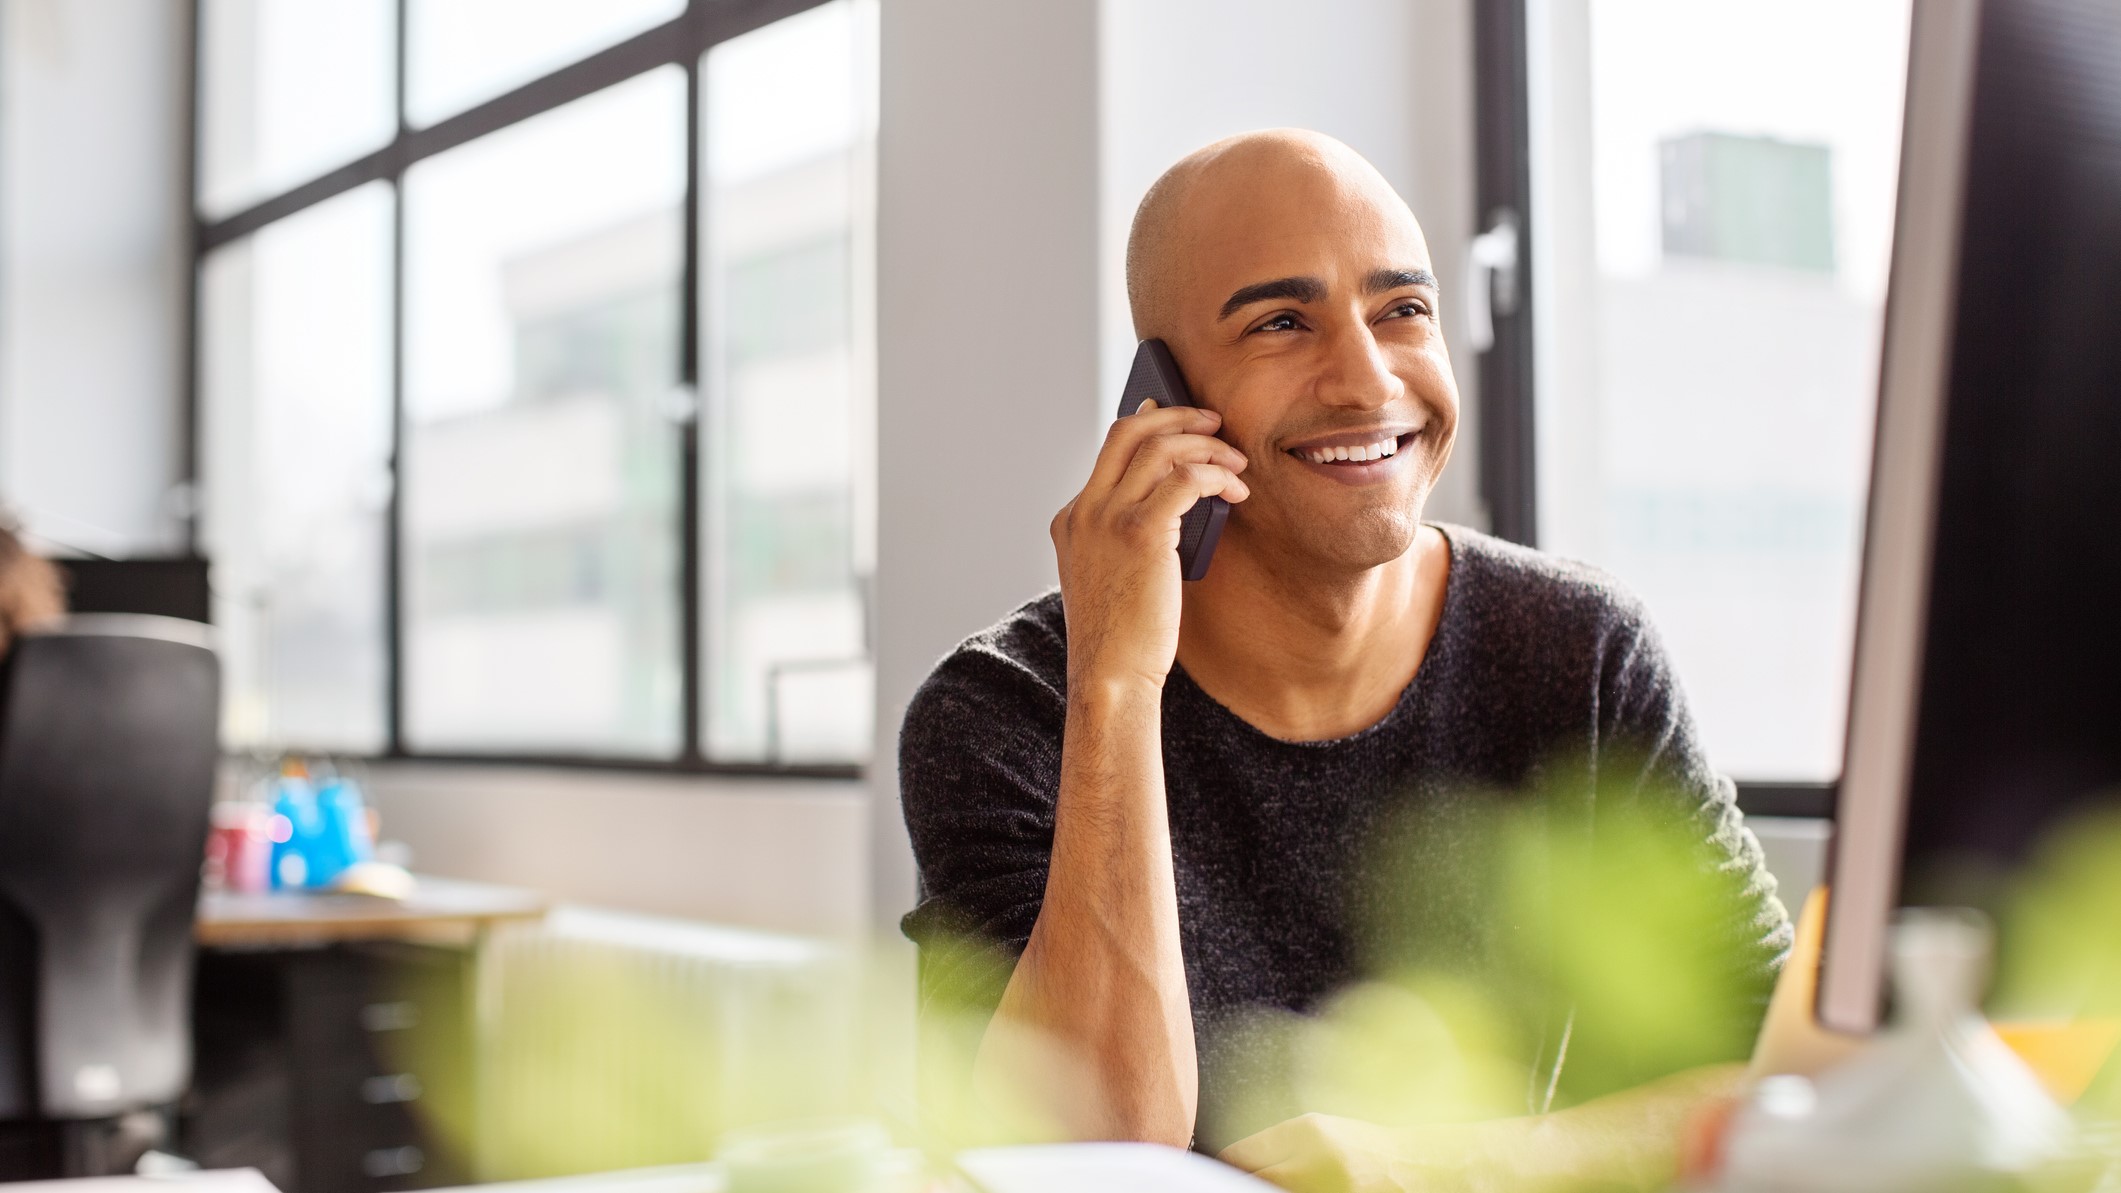 Mature man talking on phone and smiling. Hispanic male professional working at his desk in office.